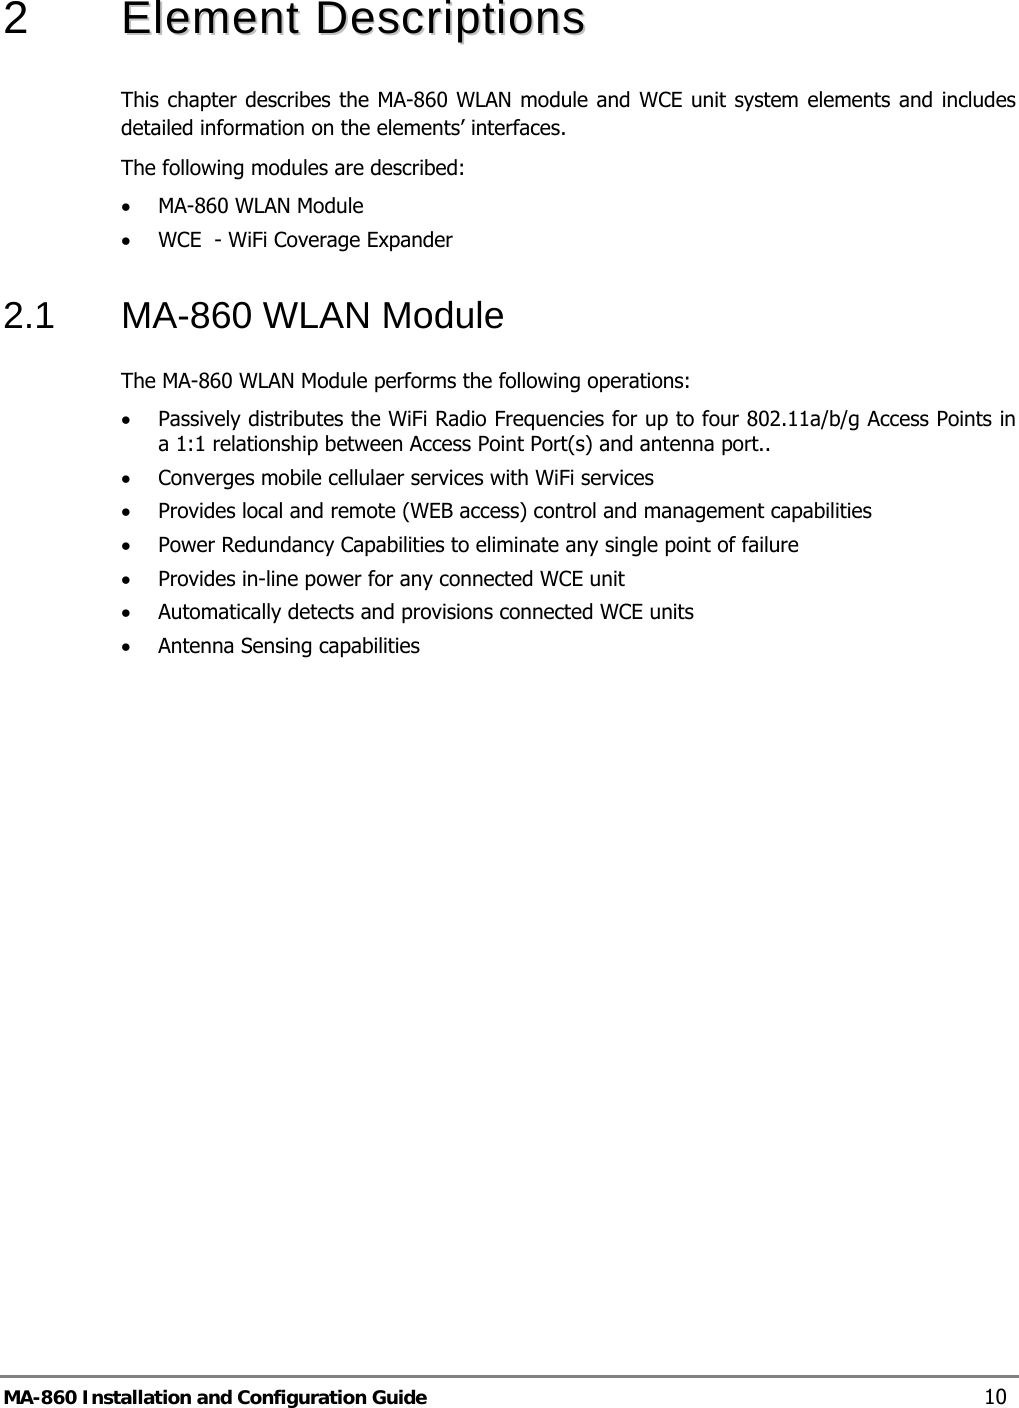  2   EElleemmeenntt  DDeessccrriippttiioonnss  This chapter describes the MA-860 WLAN module and WCE unit system elements and includes detailed information on the elements’ interfaces. The following modules are described: • MA-860 WLAN Module • WCE  - WiFi Coverage Expander 2.1  MA-860 WLAN Module  The MA-860 WLAN Module performs the following operations: • Passively distributes the WiFi Radio Frequencies for up to four 802.11a/b/g Access Points in a 1:1 relationship between Access Point Port(s) and antenna port..   • Converges mobile cellulaer services with WiFi services • Provides local and remote (WEB access) control and management capabilities  • Power Redundancy Capabilities to eliminate any single point of failure • Provides in-line power for any connected WCE unit • Automatically detects and provisions connected WCE units • Antenna Sensing capabilities MA-860 Installation and Configuration Guide  10 